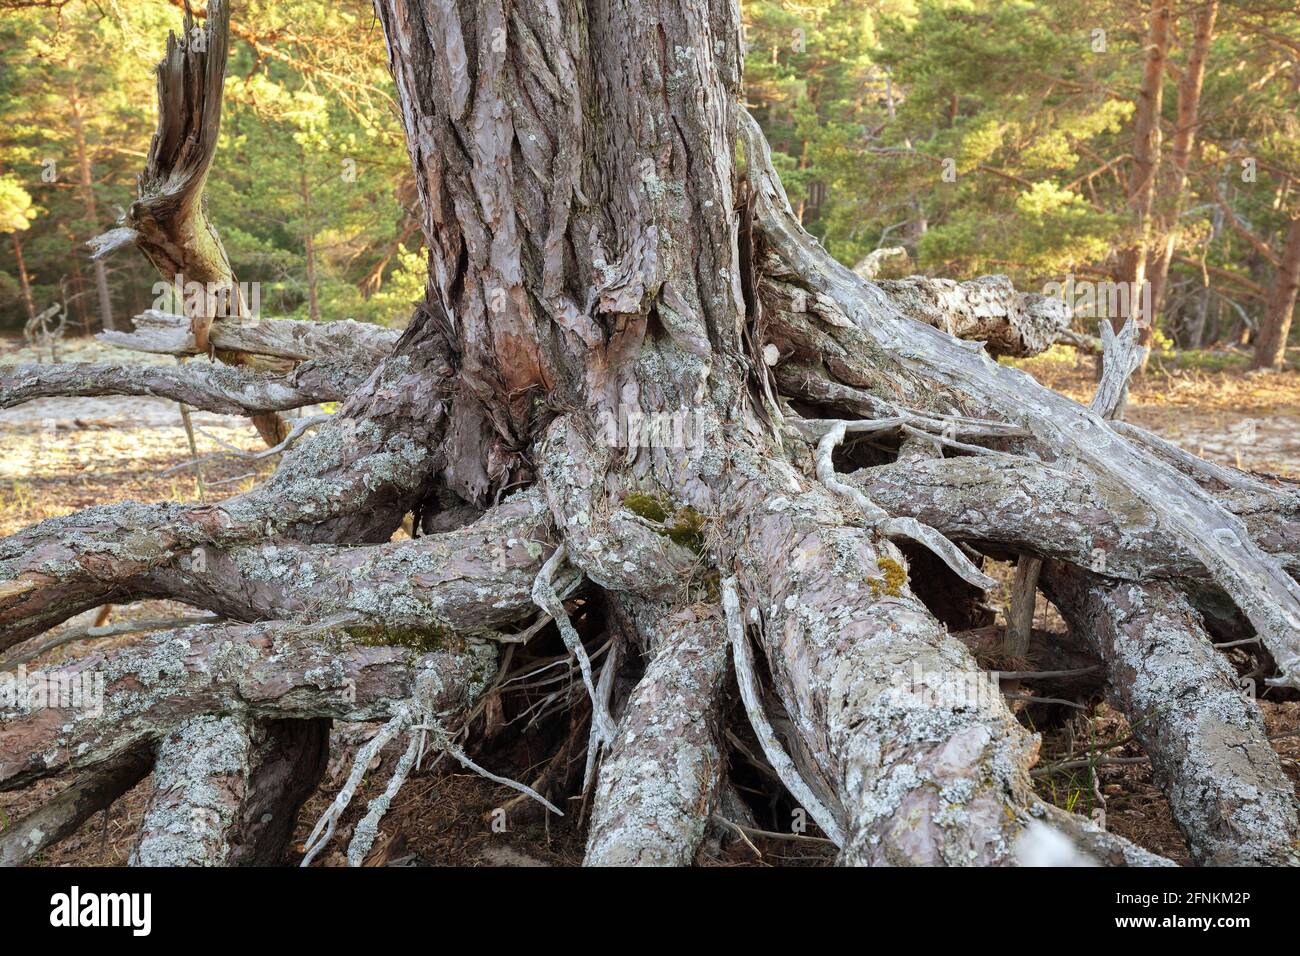 Roots and trunk of old pine tree, sunlit forest in the background Stock Photo